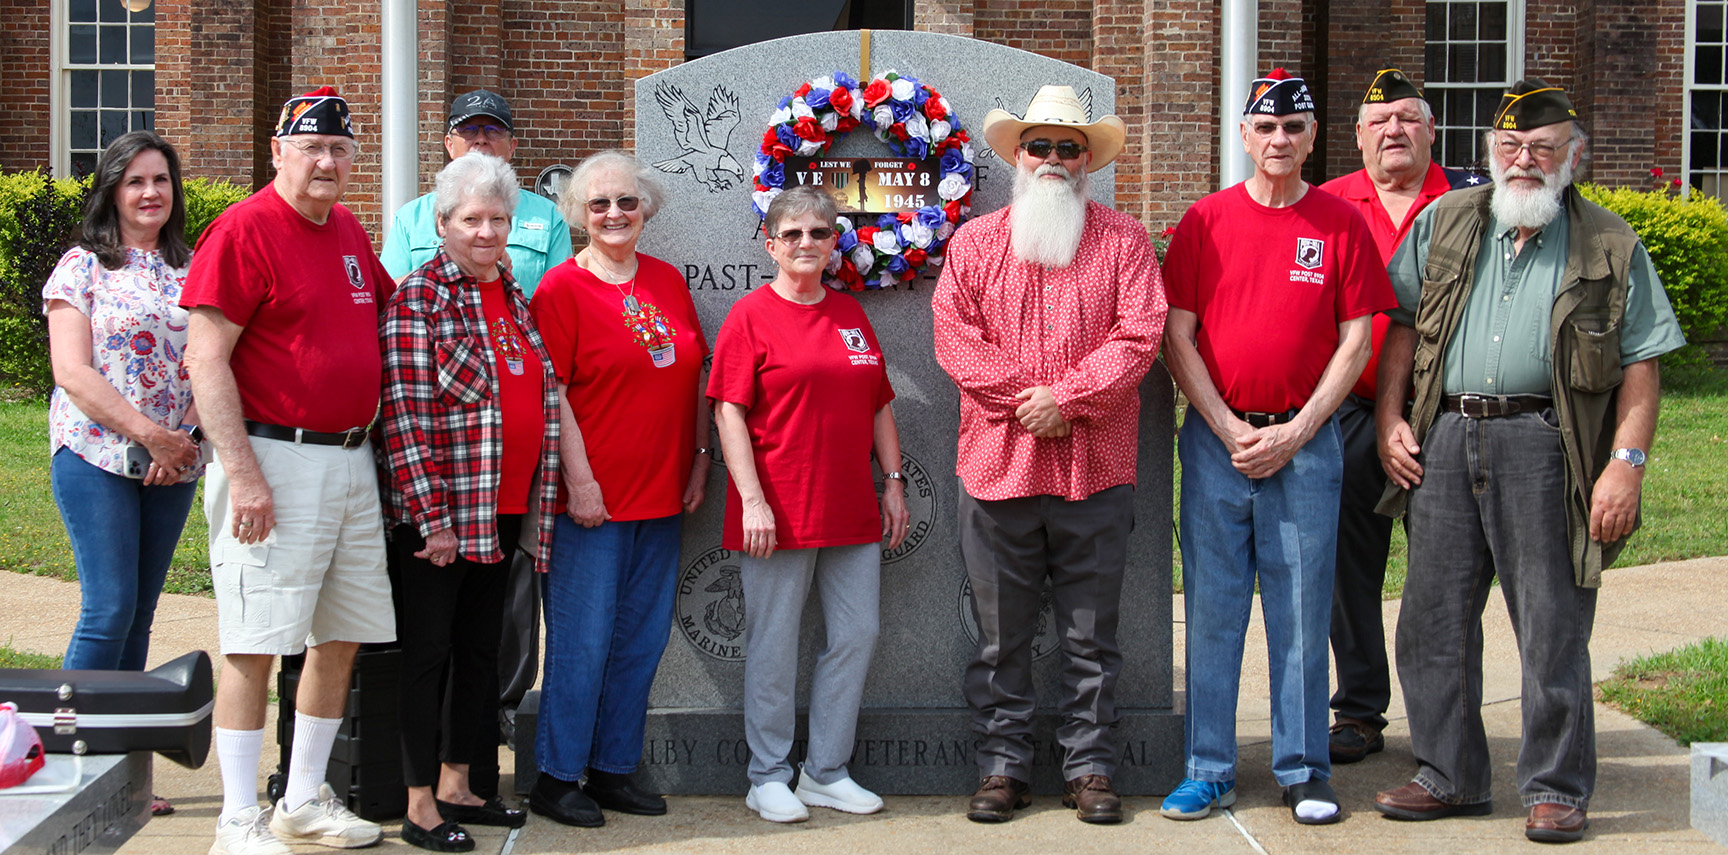 VE Day remembered by local VFW